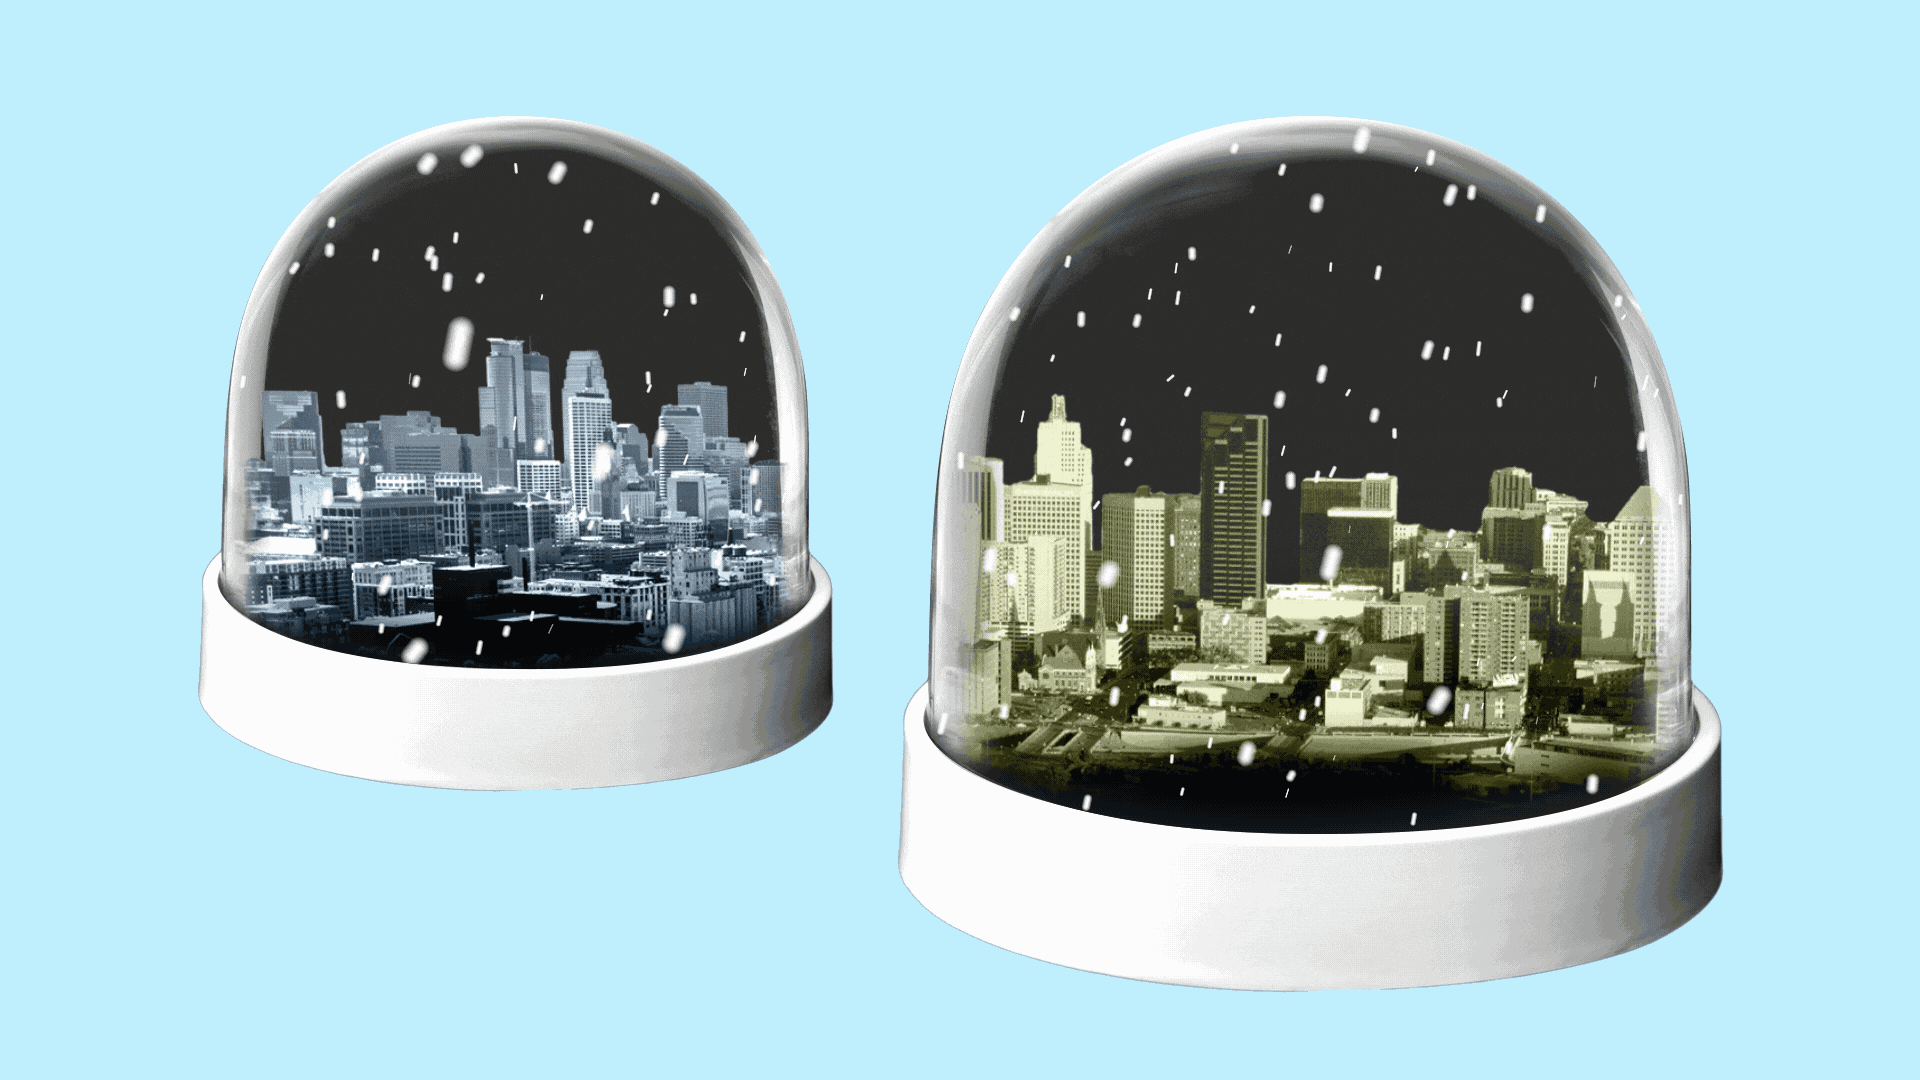 Illustration of Minneapolis and St. Paul in snow globes, with animated snow falling on them.